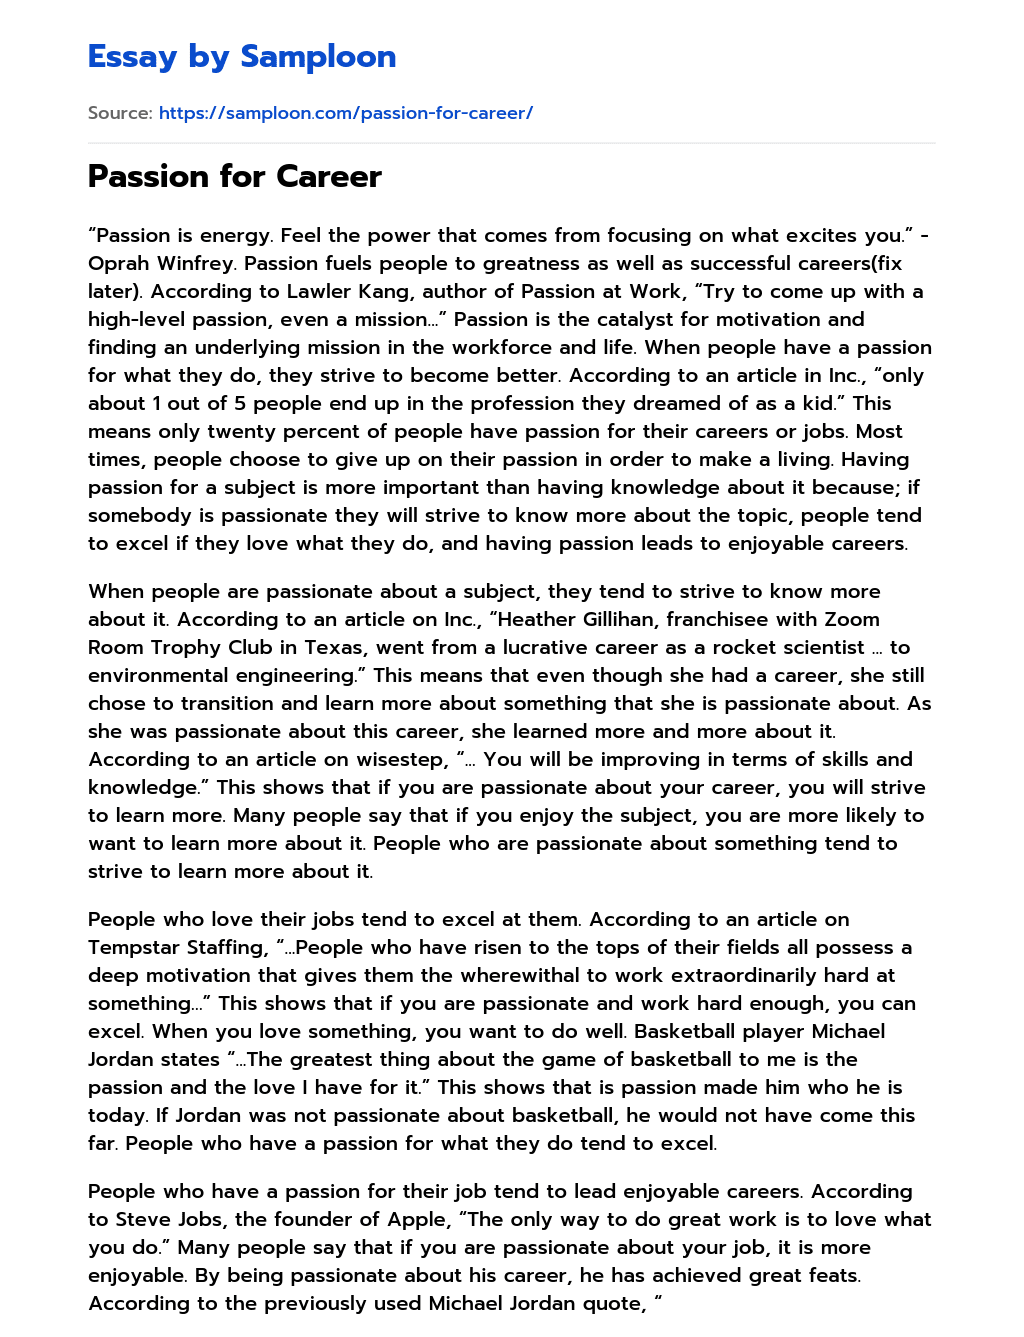 Passion for Career essay